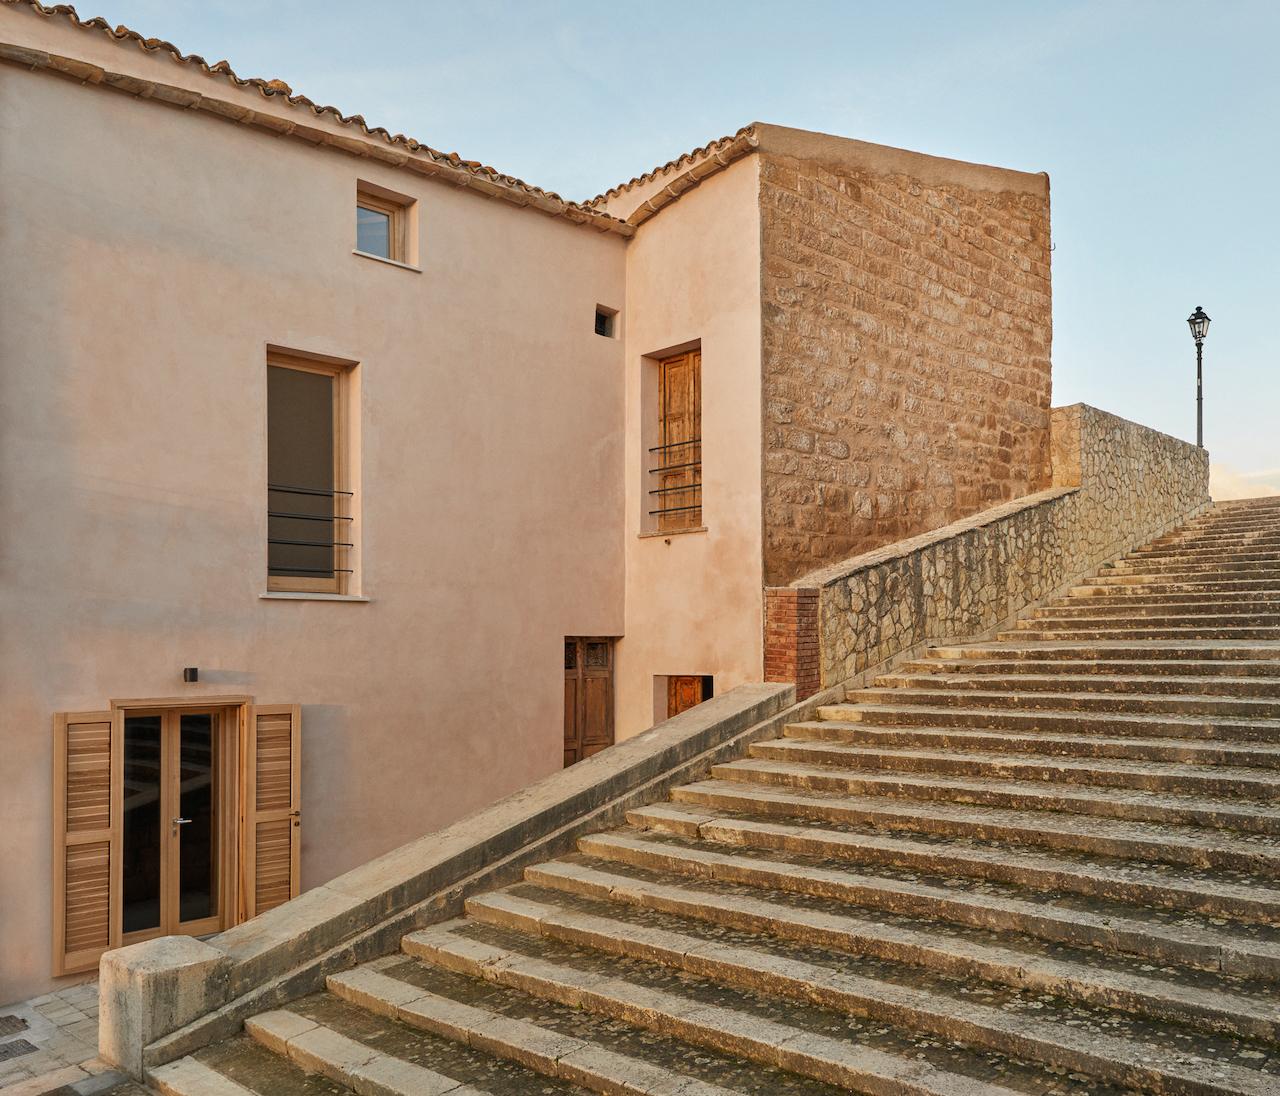 Airbnb Wants Someone to Live Rent-Free in this Sicilian Townhouse